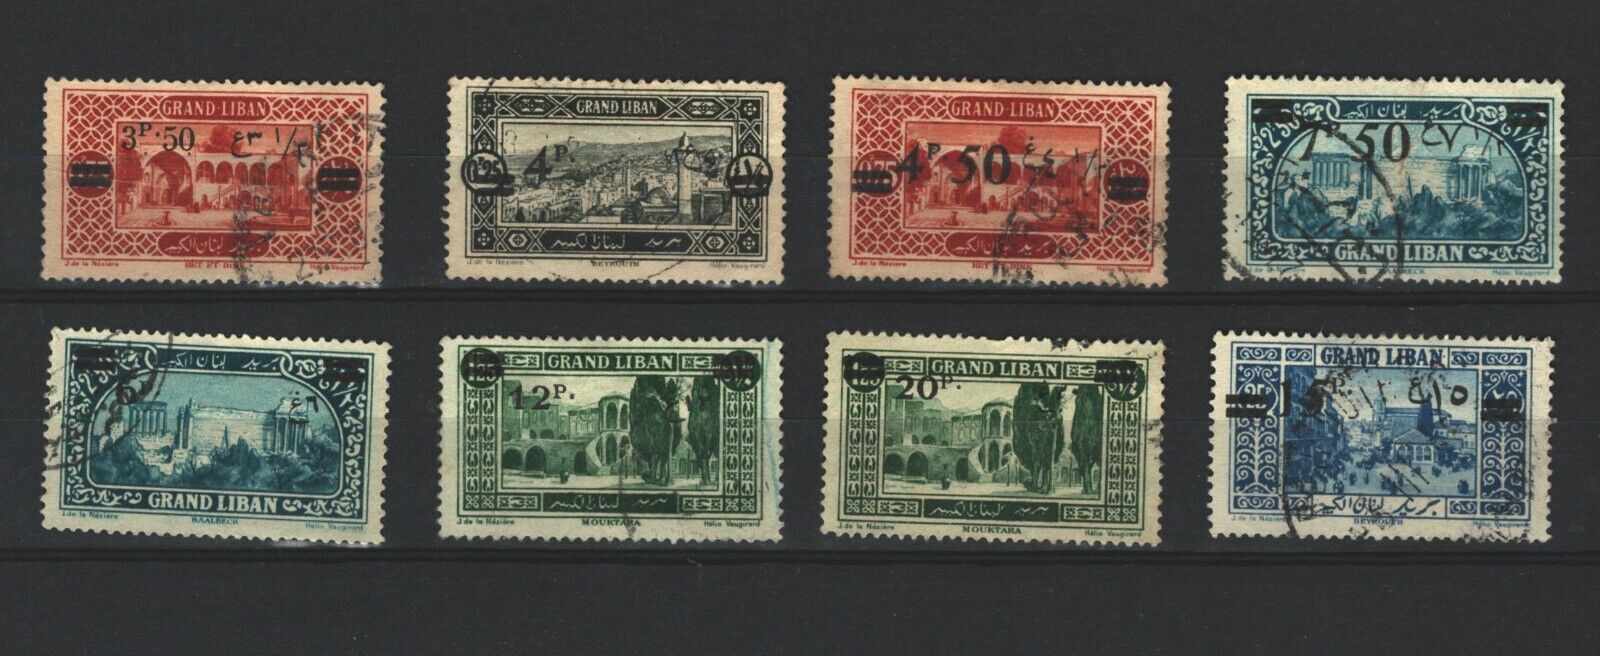 Liban  French colonies Postal USED Set of  Overprinted STAMPS LOT ( Leb 62) Без бренда